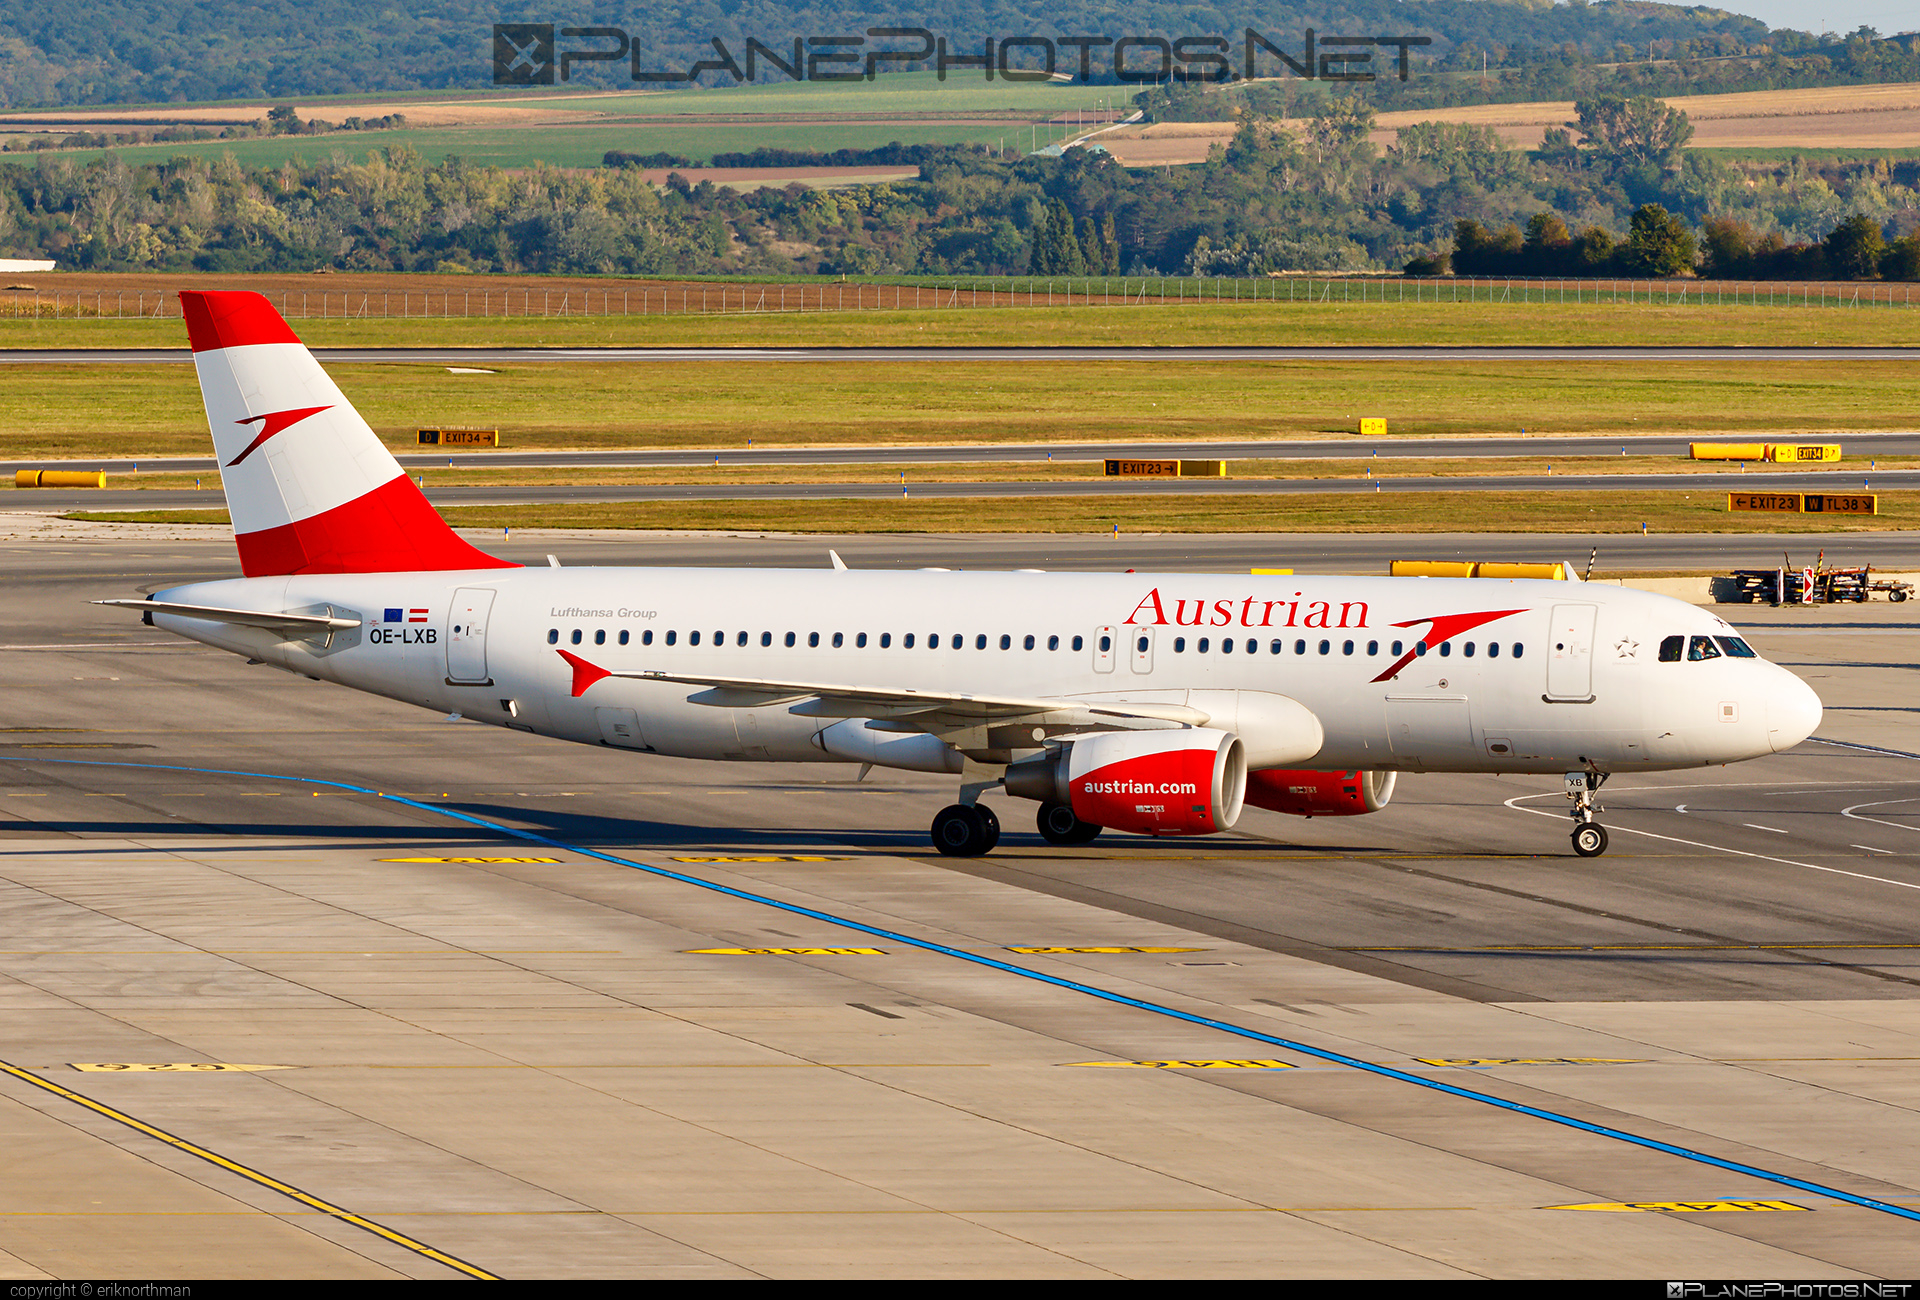 Airbus A320-216 - OE-LXB operated by Austrian Airlines #a320 #a320family #airbus #airbus320 #austrian #austrianAirlines